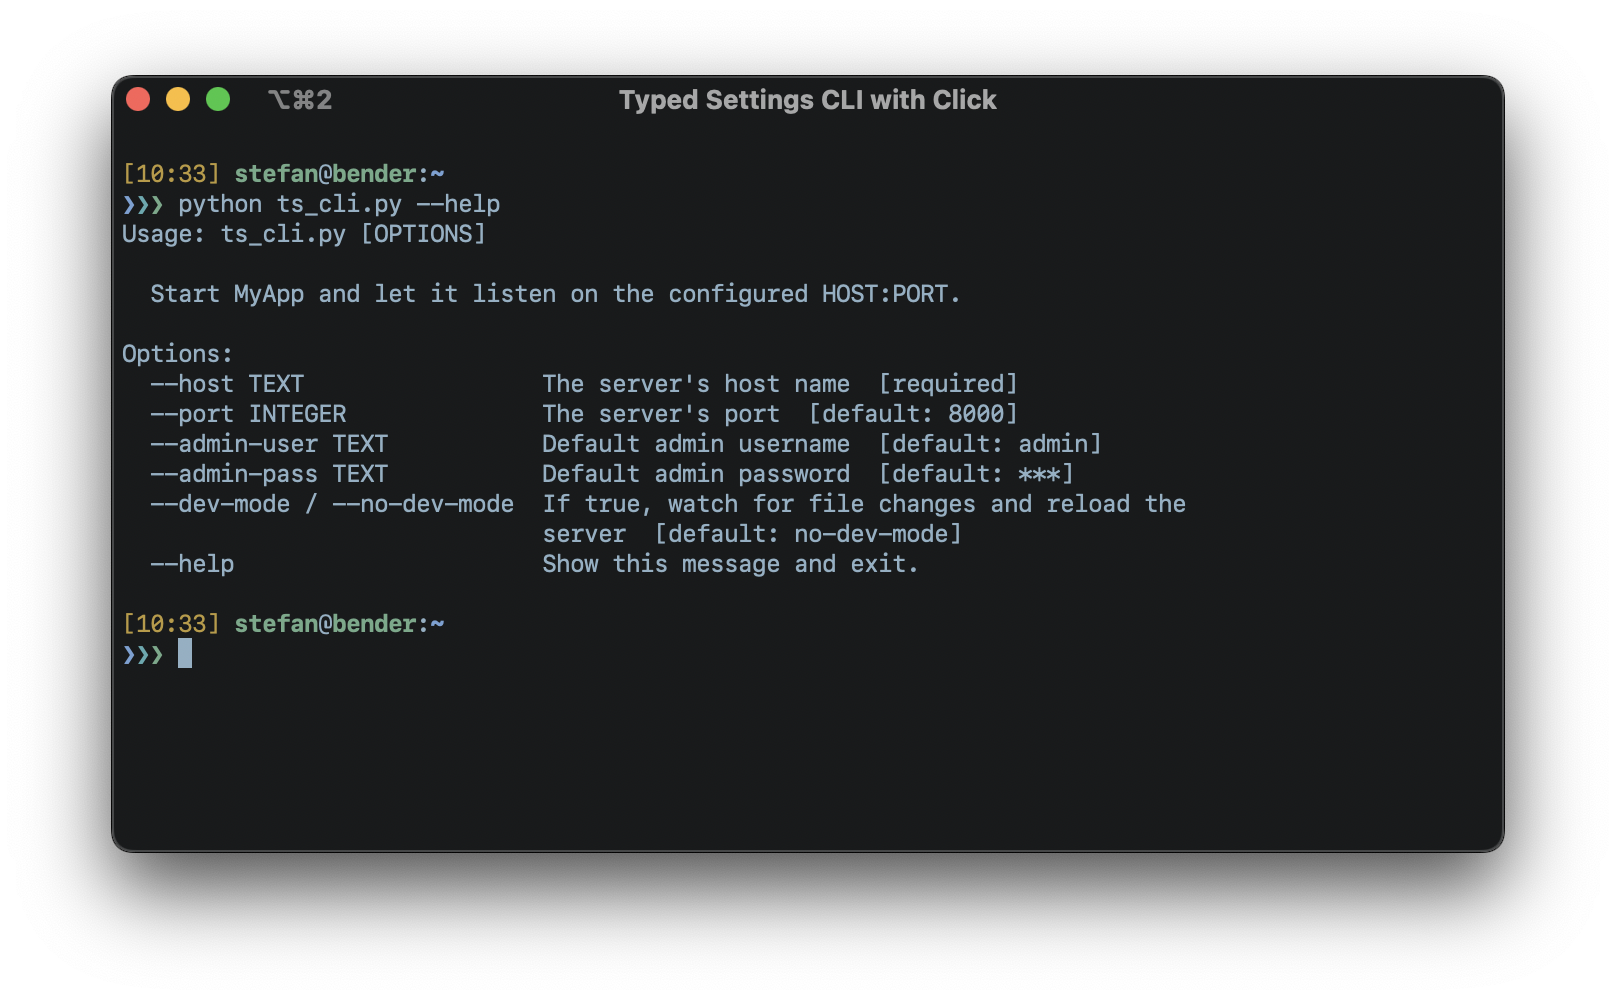 "--help" output of a "Click" based Typed Settings CLI